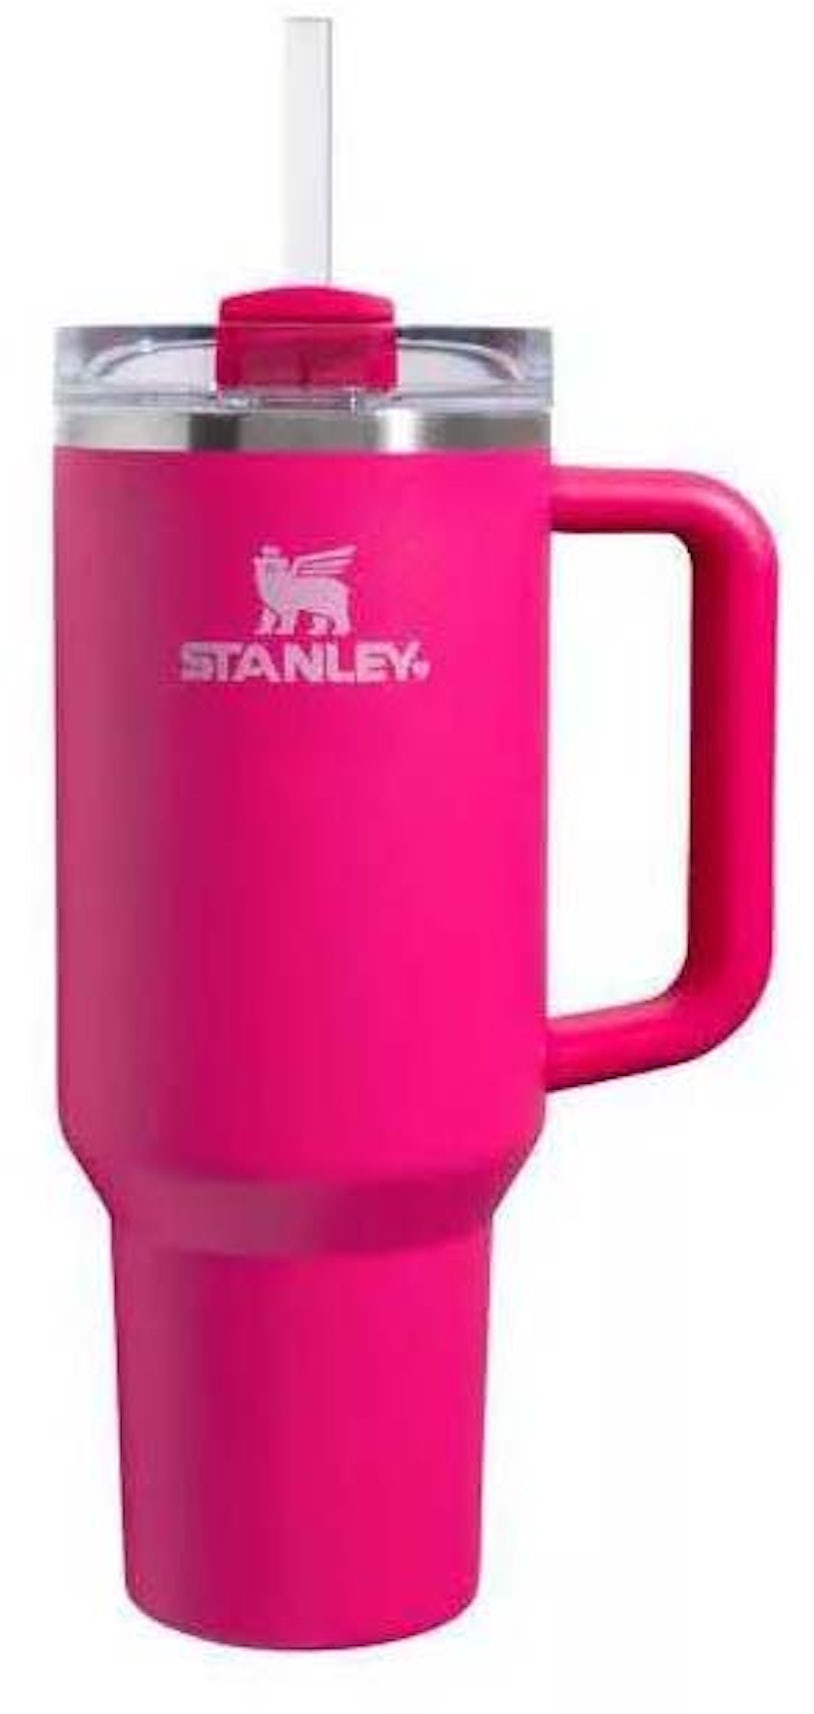 https://images.stockx.com/images/Stanley-Flowstate-Quencher-40oz-Target-Exclusive-Tumbler-Cosmo-Pink.jpg?fit=fill&bg=FFFFFF&w=1200&h=857&fm=jpg&auto=compress&dpr=2&trim=color&trimcolor=ffffff&updated_at=1704219012&q=60